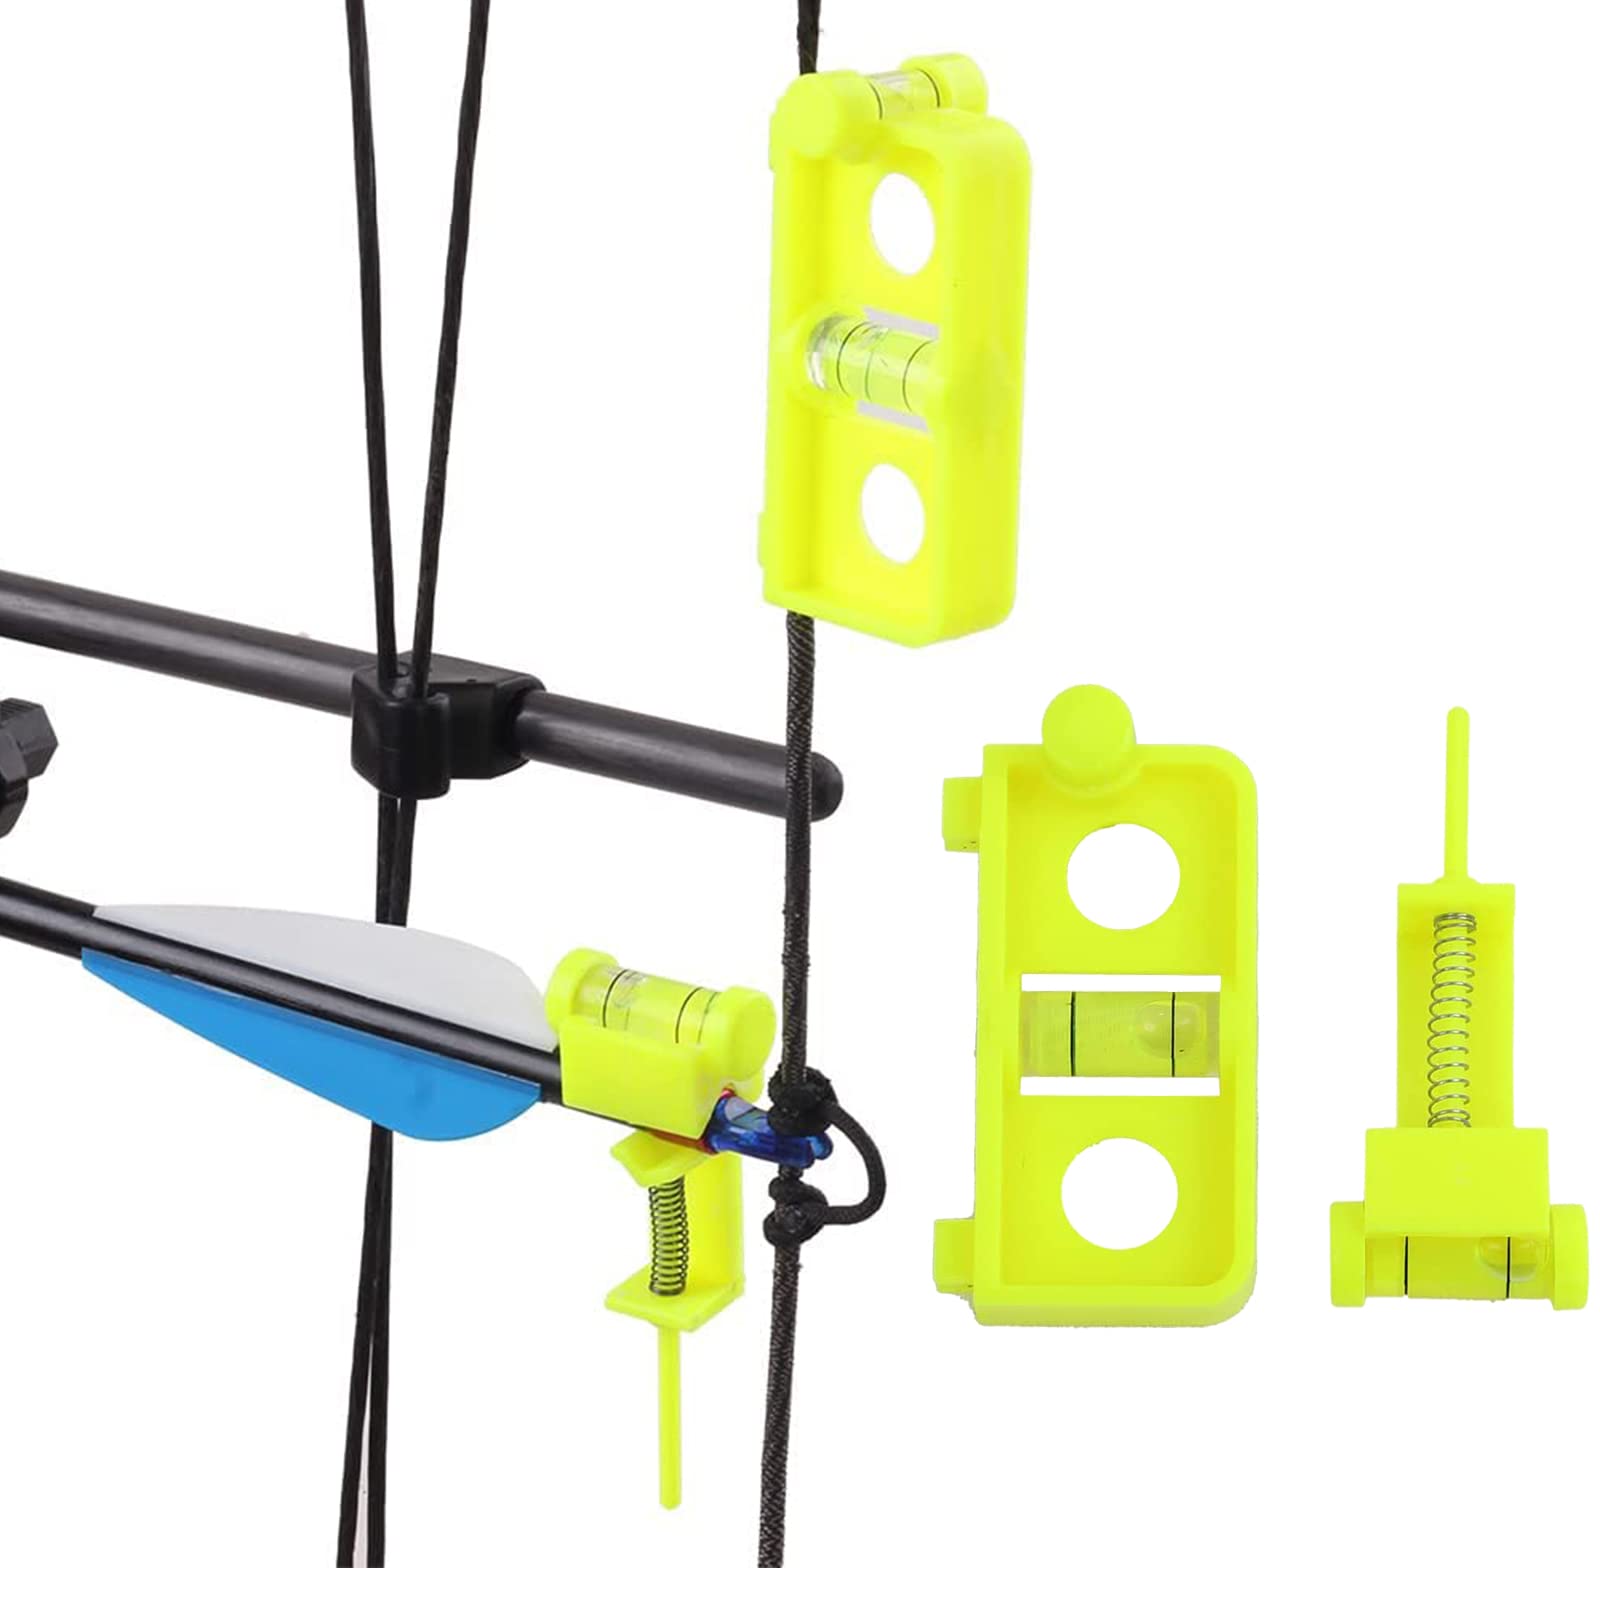 SOPOGER Archery Multifunctional Bow Level Tuning and Mounting